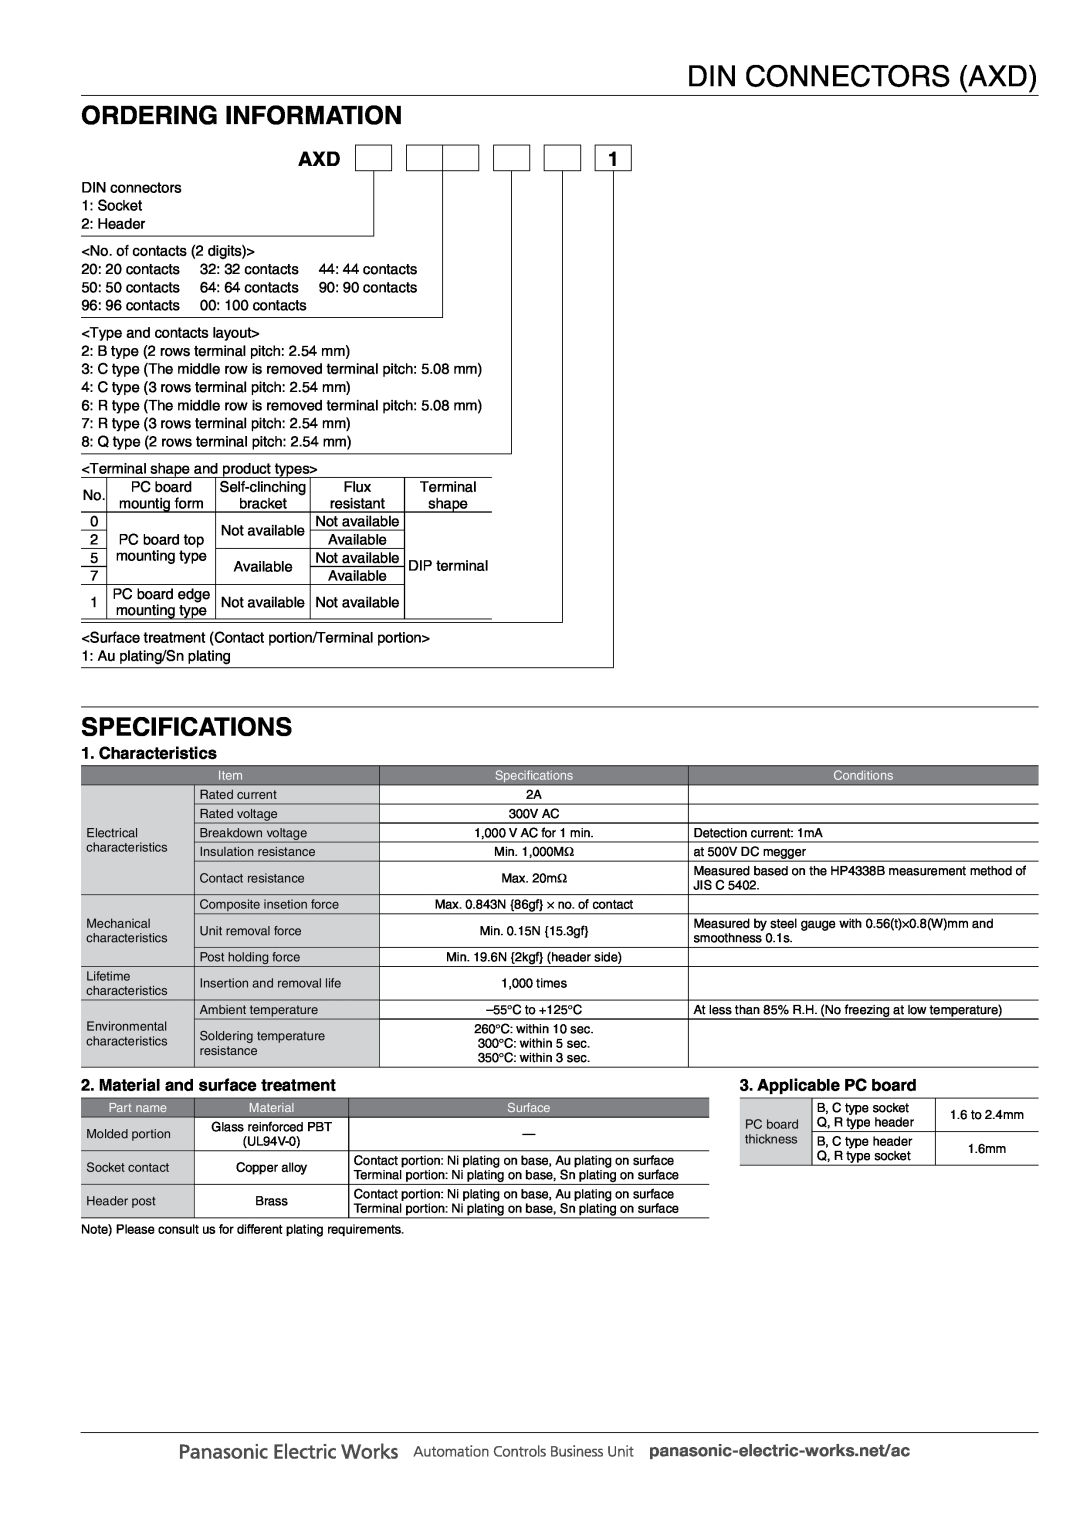 Panasonic DIN Connectors manual Ordering Information, Specifications, Characteristics, Material and surface treatment 